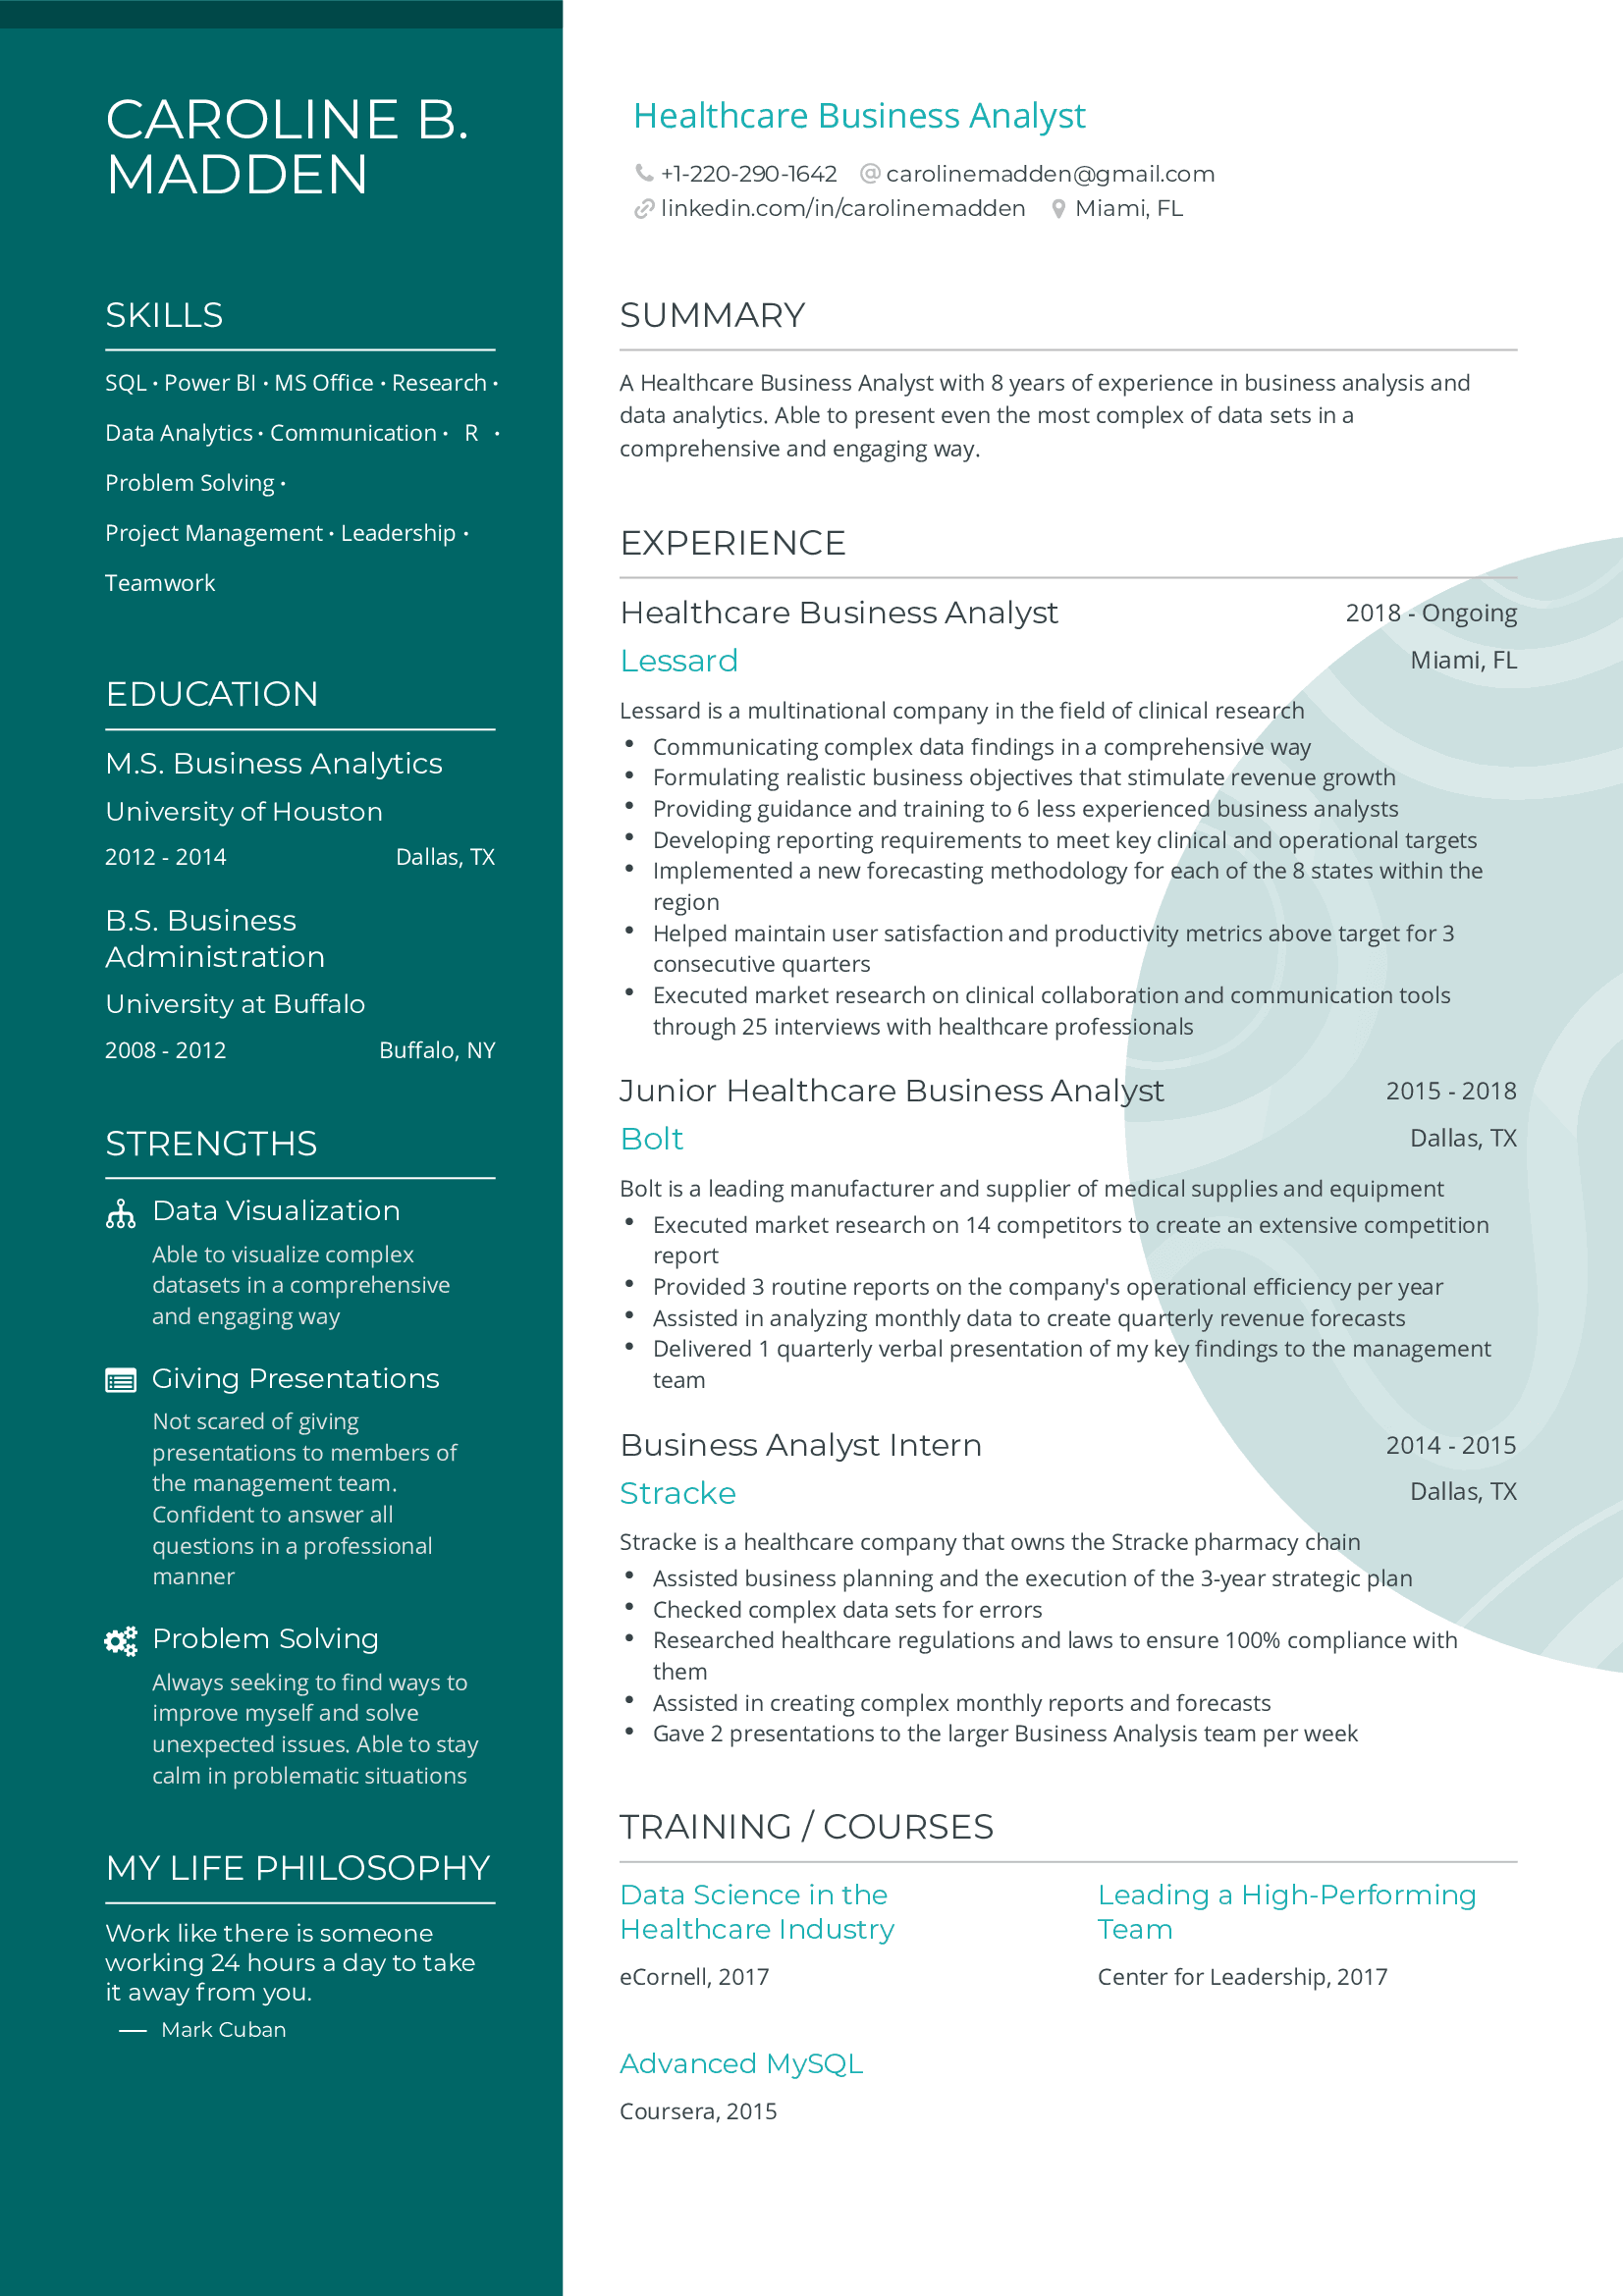 Healthcare business analyst resume.png